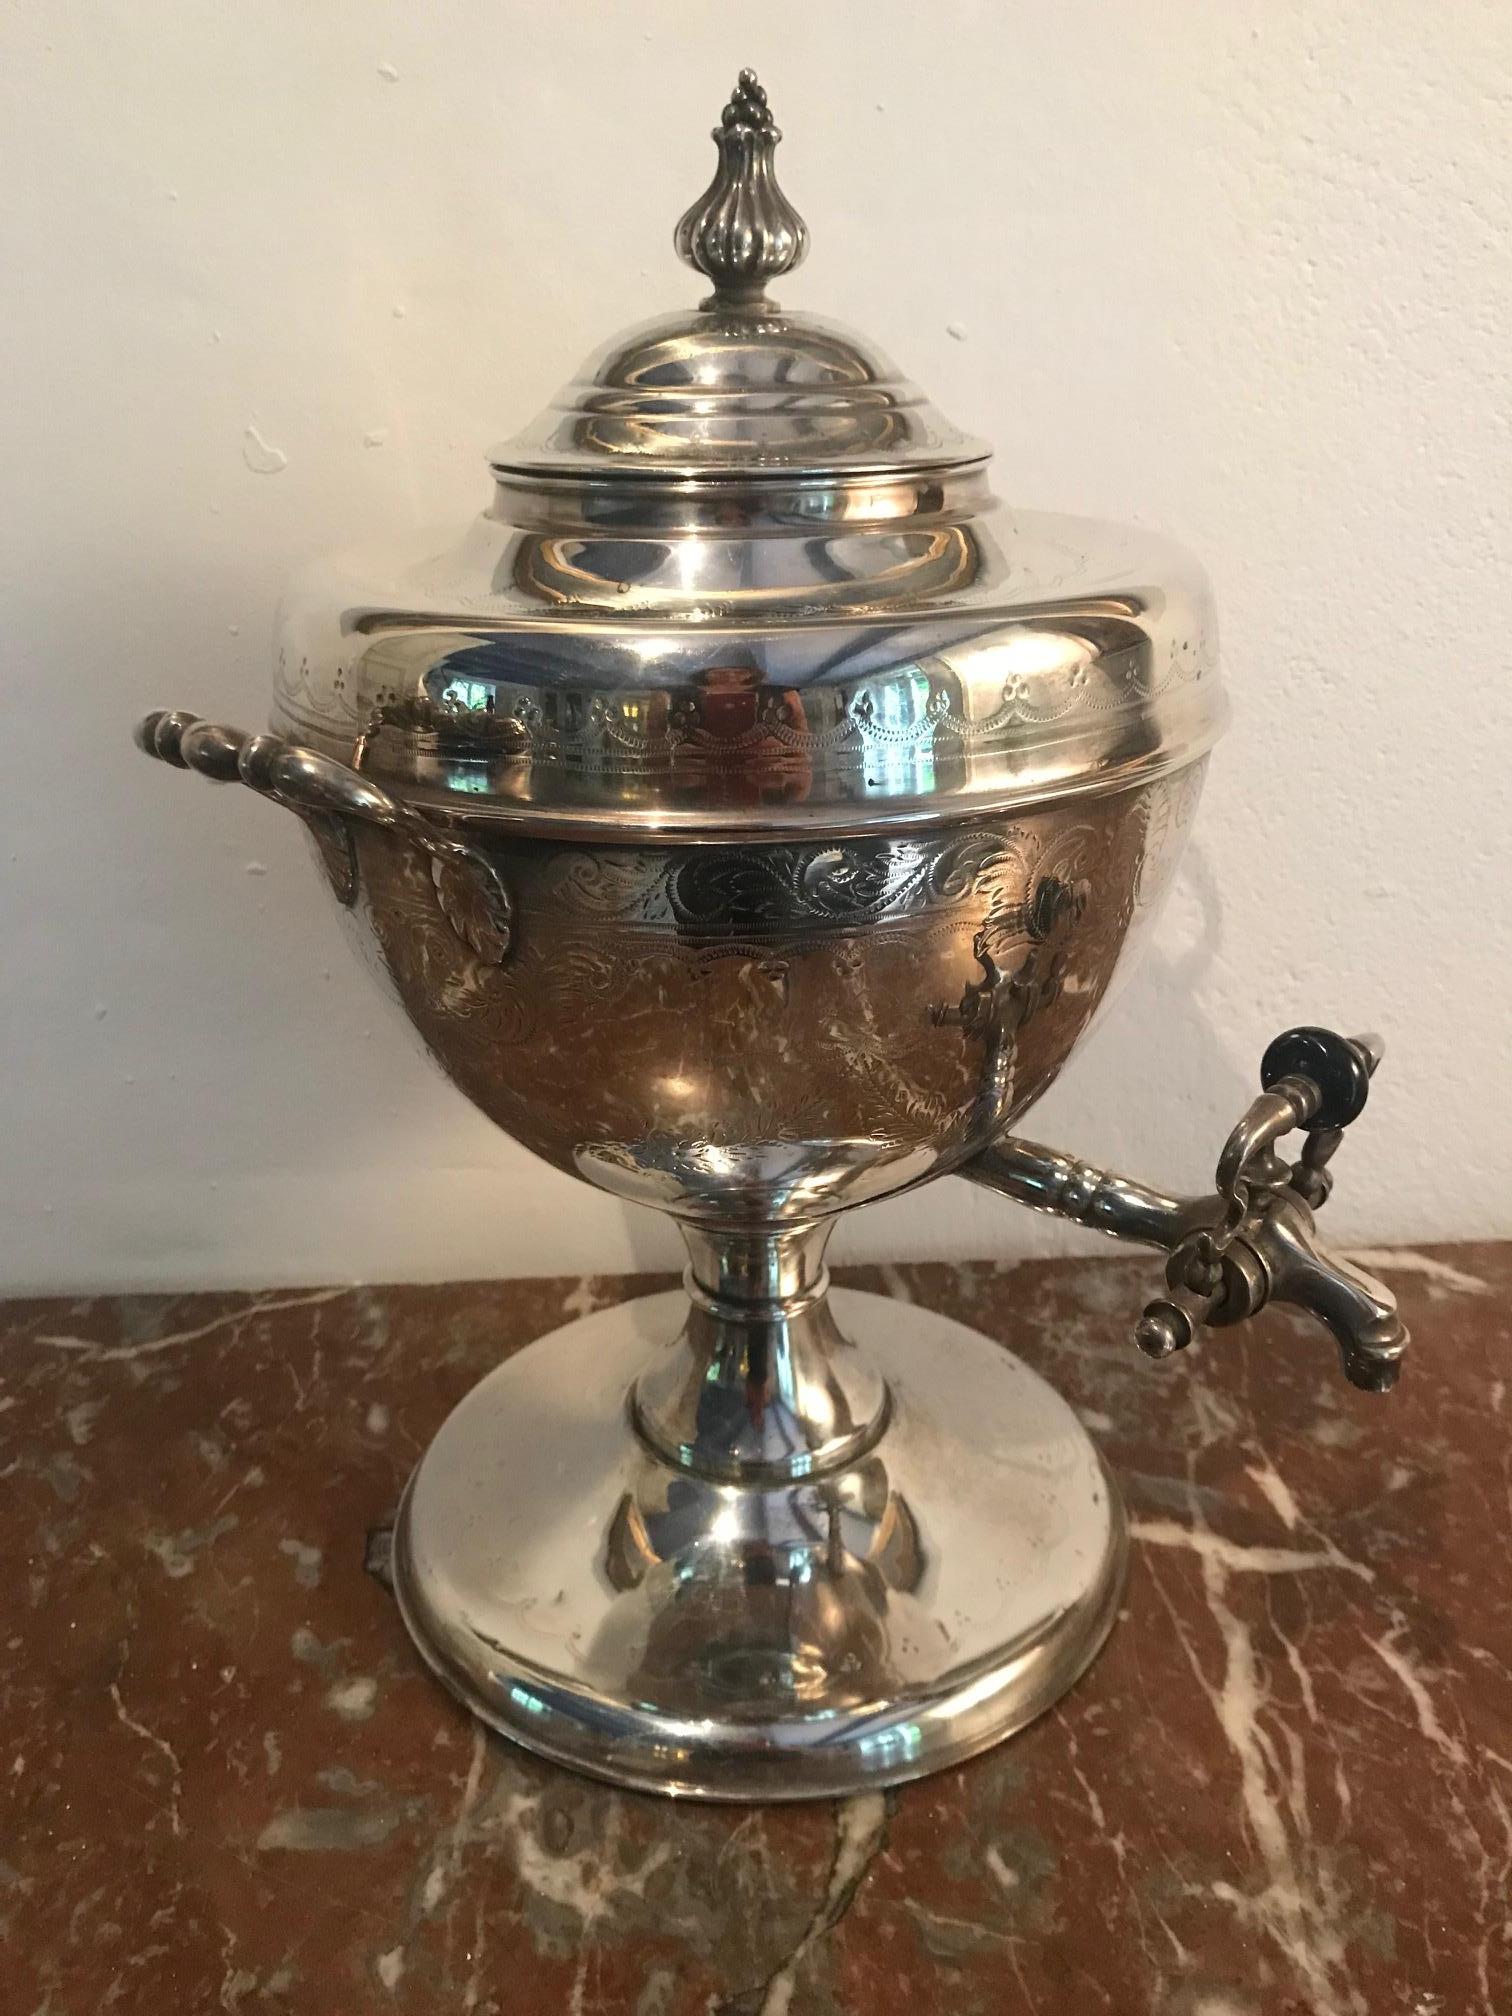 A 19th century elegant silver plate tea urn/ samovar with delicate floral engraving.